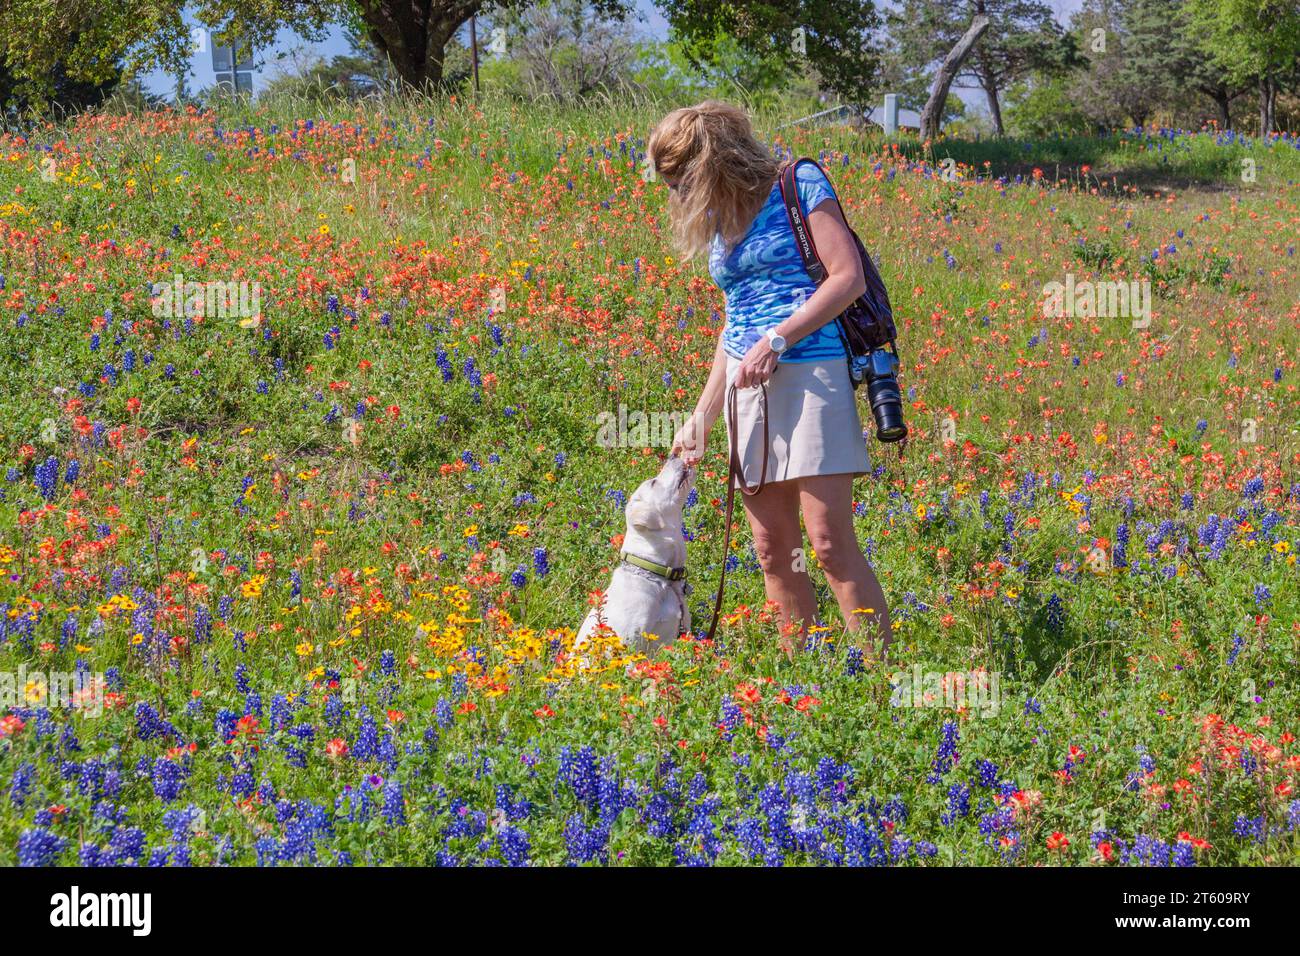 Zoe's (Labrador puppy) first Bluebonnets and Wildflowers outing at Old Baylor College park in Independence, Texas. Stock Photo